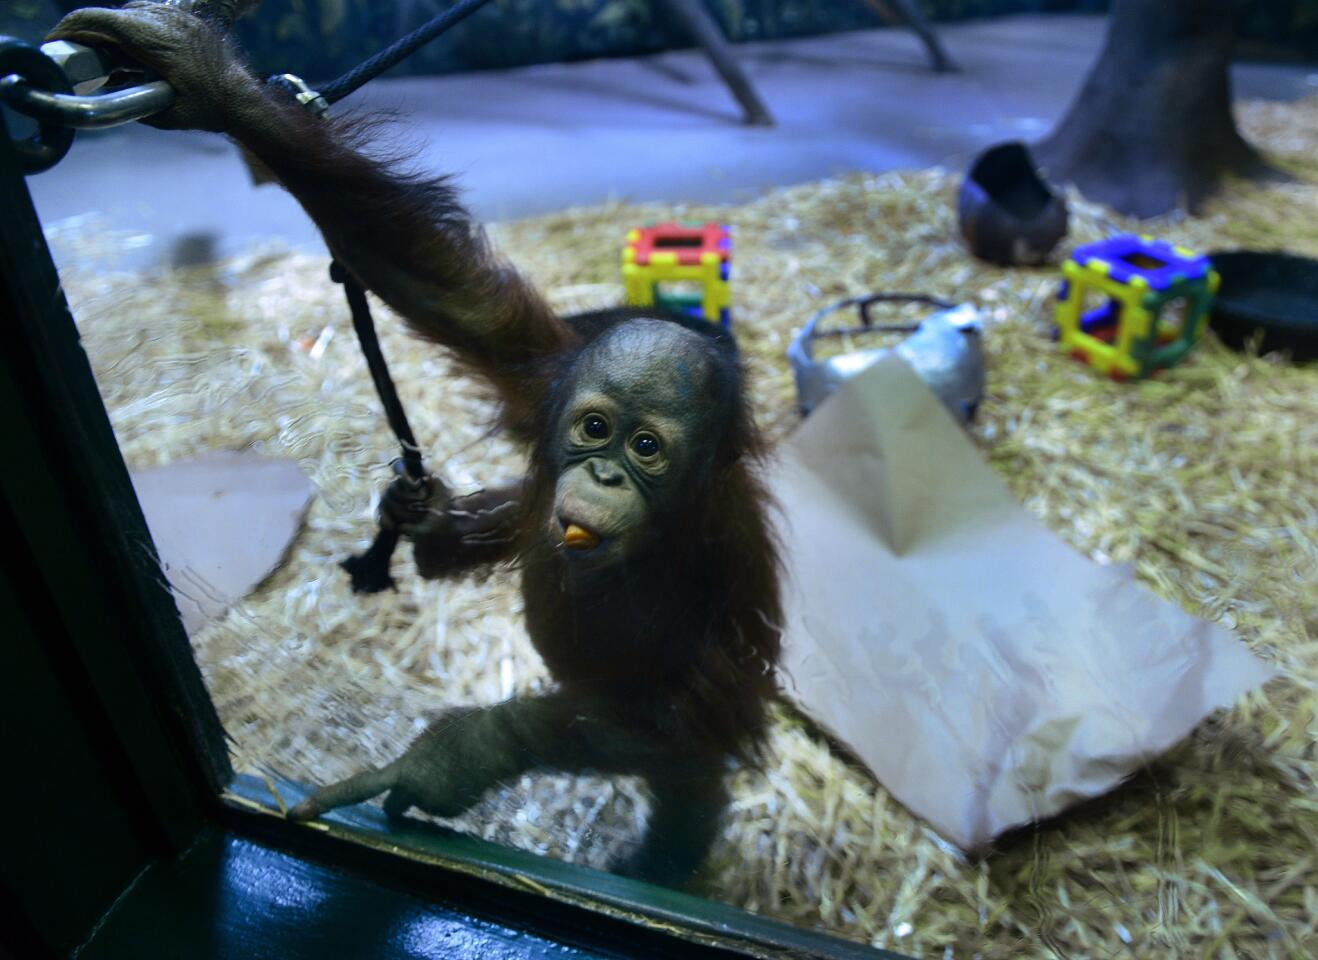 Tuah, a 1-year-old orangutan, appears in his enclosure at the Salt Lake City zoo, Thursday, Feb. 4, 2016. Tuah has predicted the Carolina Panthers will win the Super Bowl. Zoo spokeswoman Erica Hansen said the orangutan chewed up a cardboard Panthers sign and later kissed a papier-mache Panthers helmet. Hansen says he never touched the Denver Broncos sign or helmet. This was Tuah's first time handling the duties. His dad picked seven straight winners before dying in 2015. (Scott Sommerdorf /The Salt Lake Tribune via AP) DESERET NEWS OUT; LOCAL TELEVISION OUT; MAGS OUT; MANDATORY CREDIT